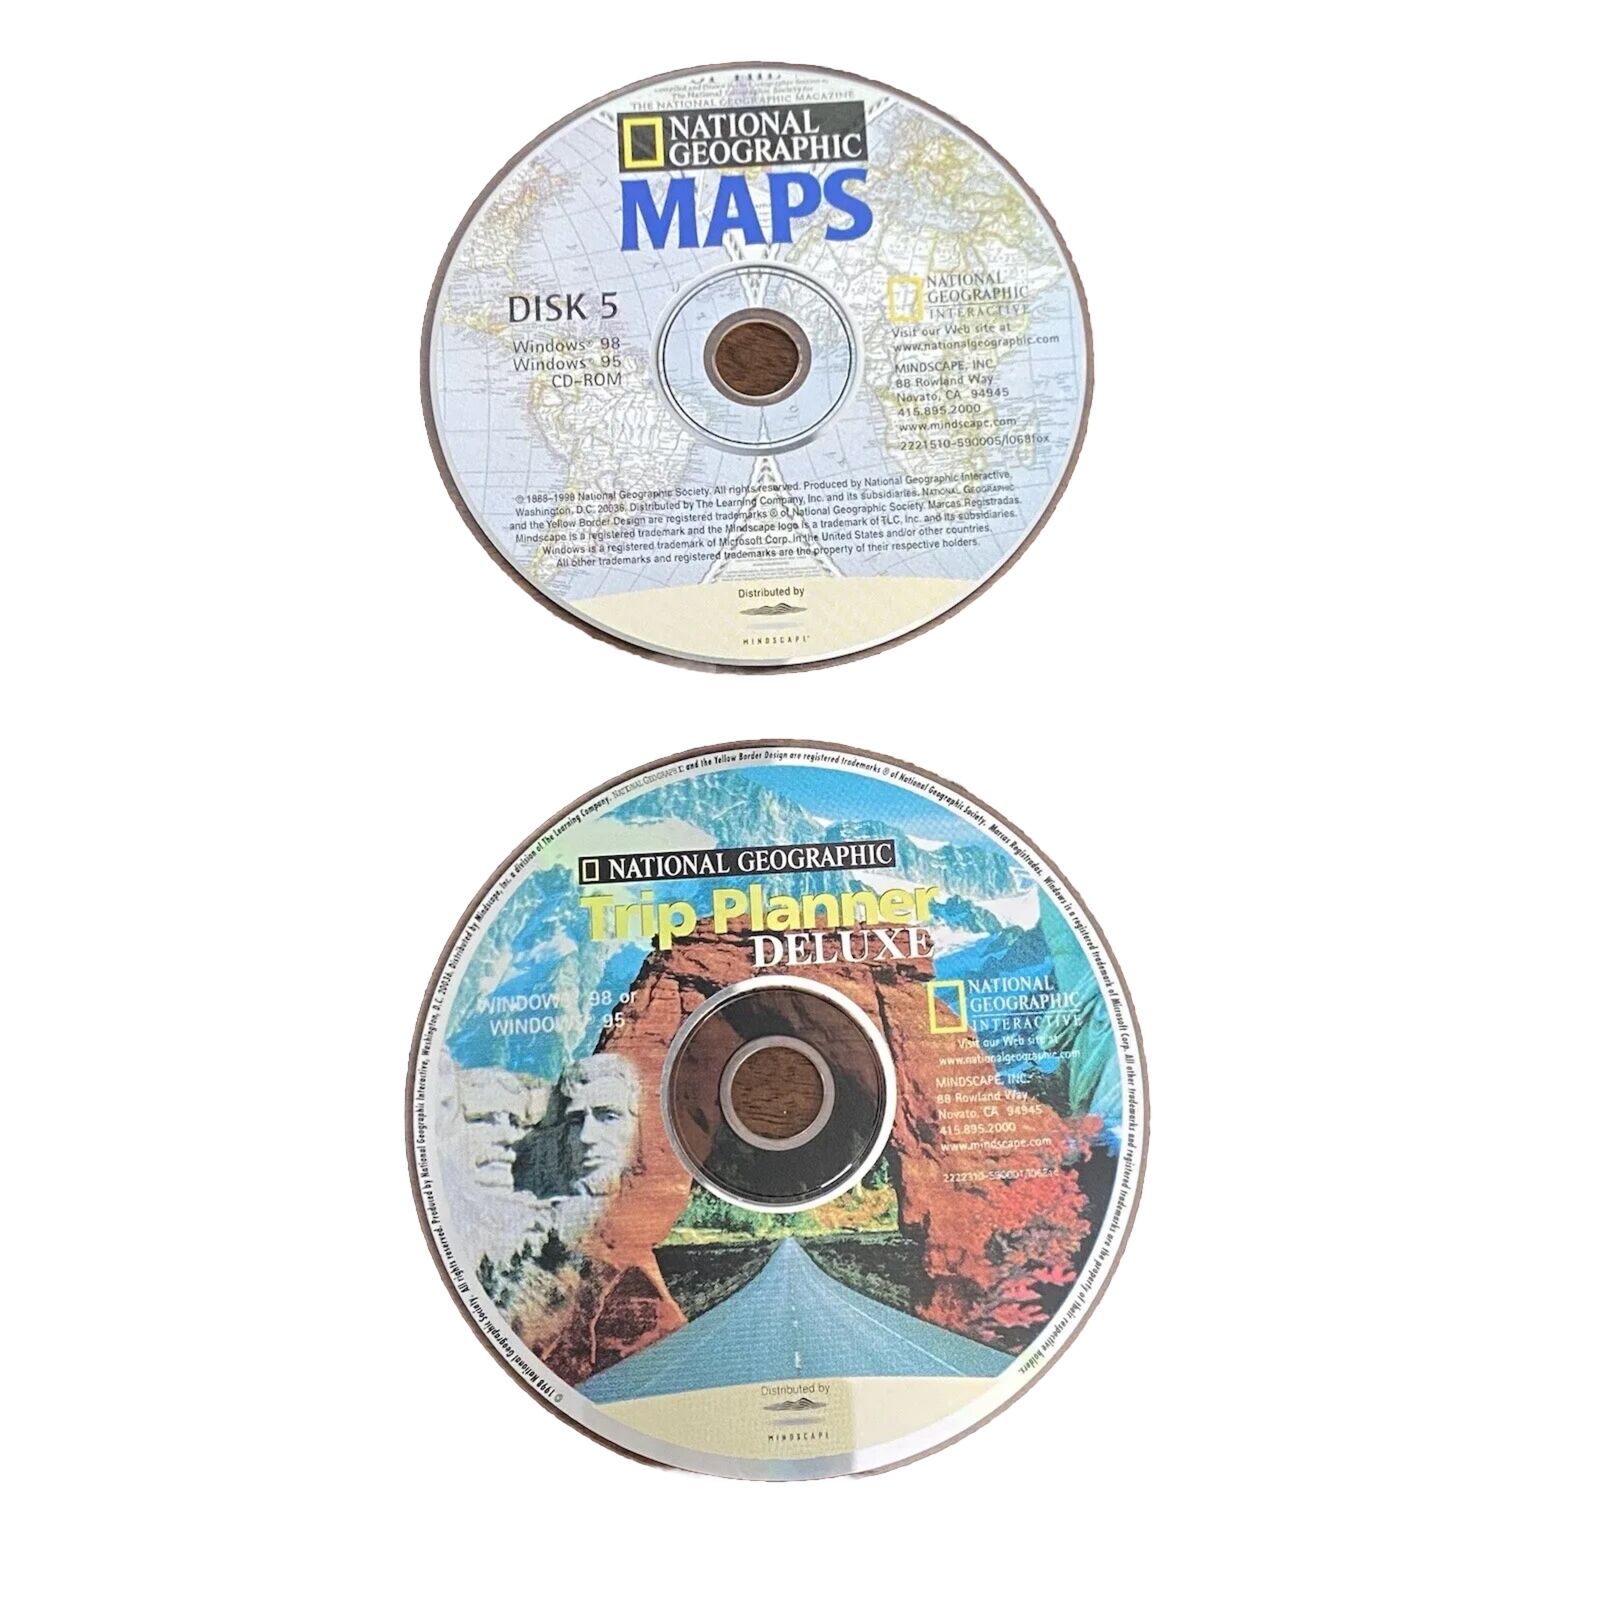 Vintage 1998 Lot of 2 National Geographic Maps/ Trip Planner Deluxe CD-ROM